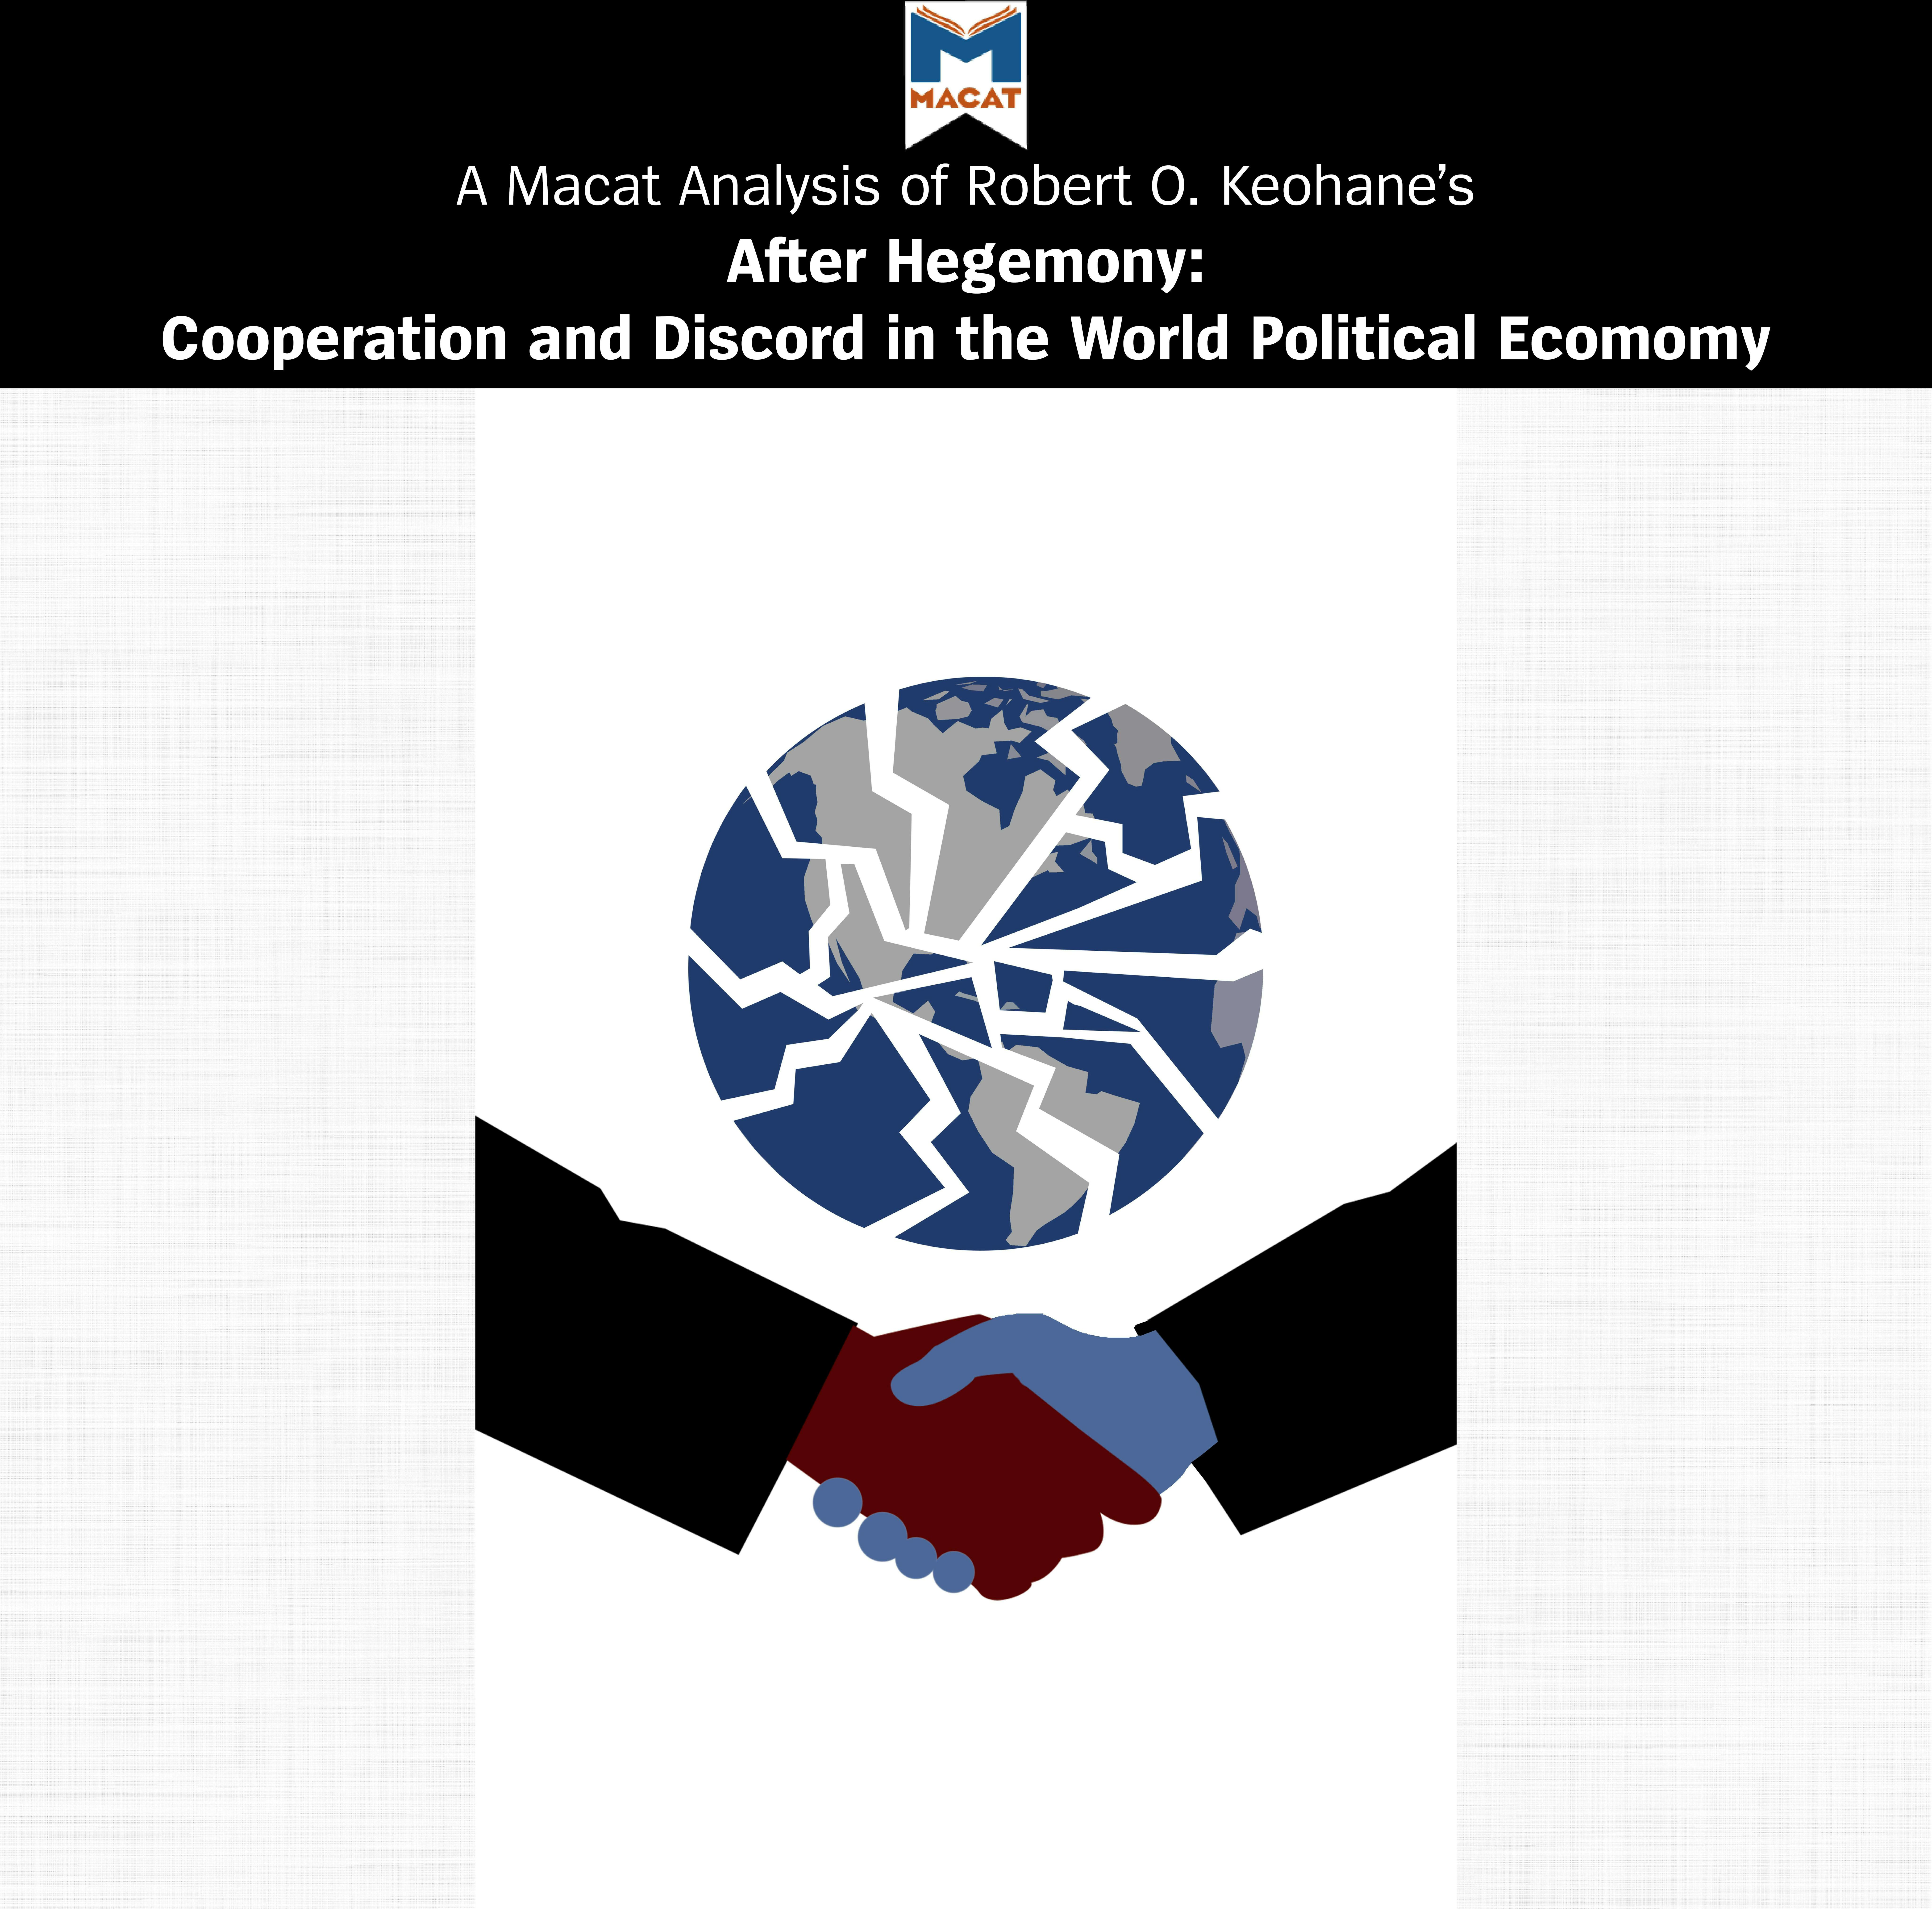 A Macat Analysis of Robert O. Keohane's After Hegemony: Cooperation and Discord in the World Political Economy - undefined